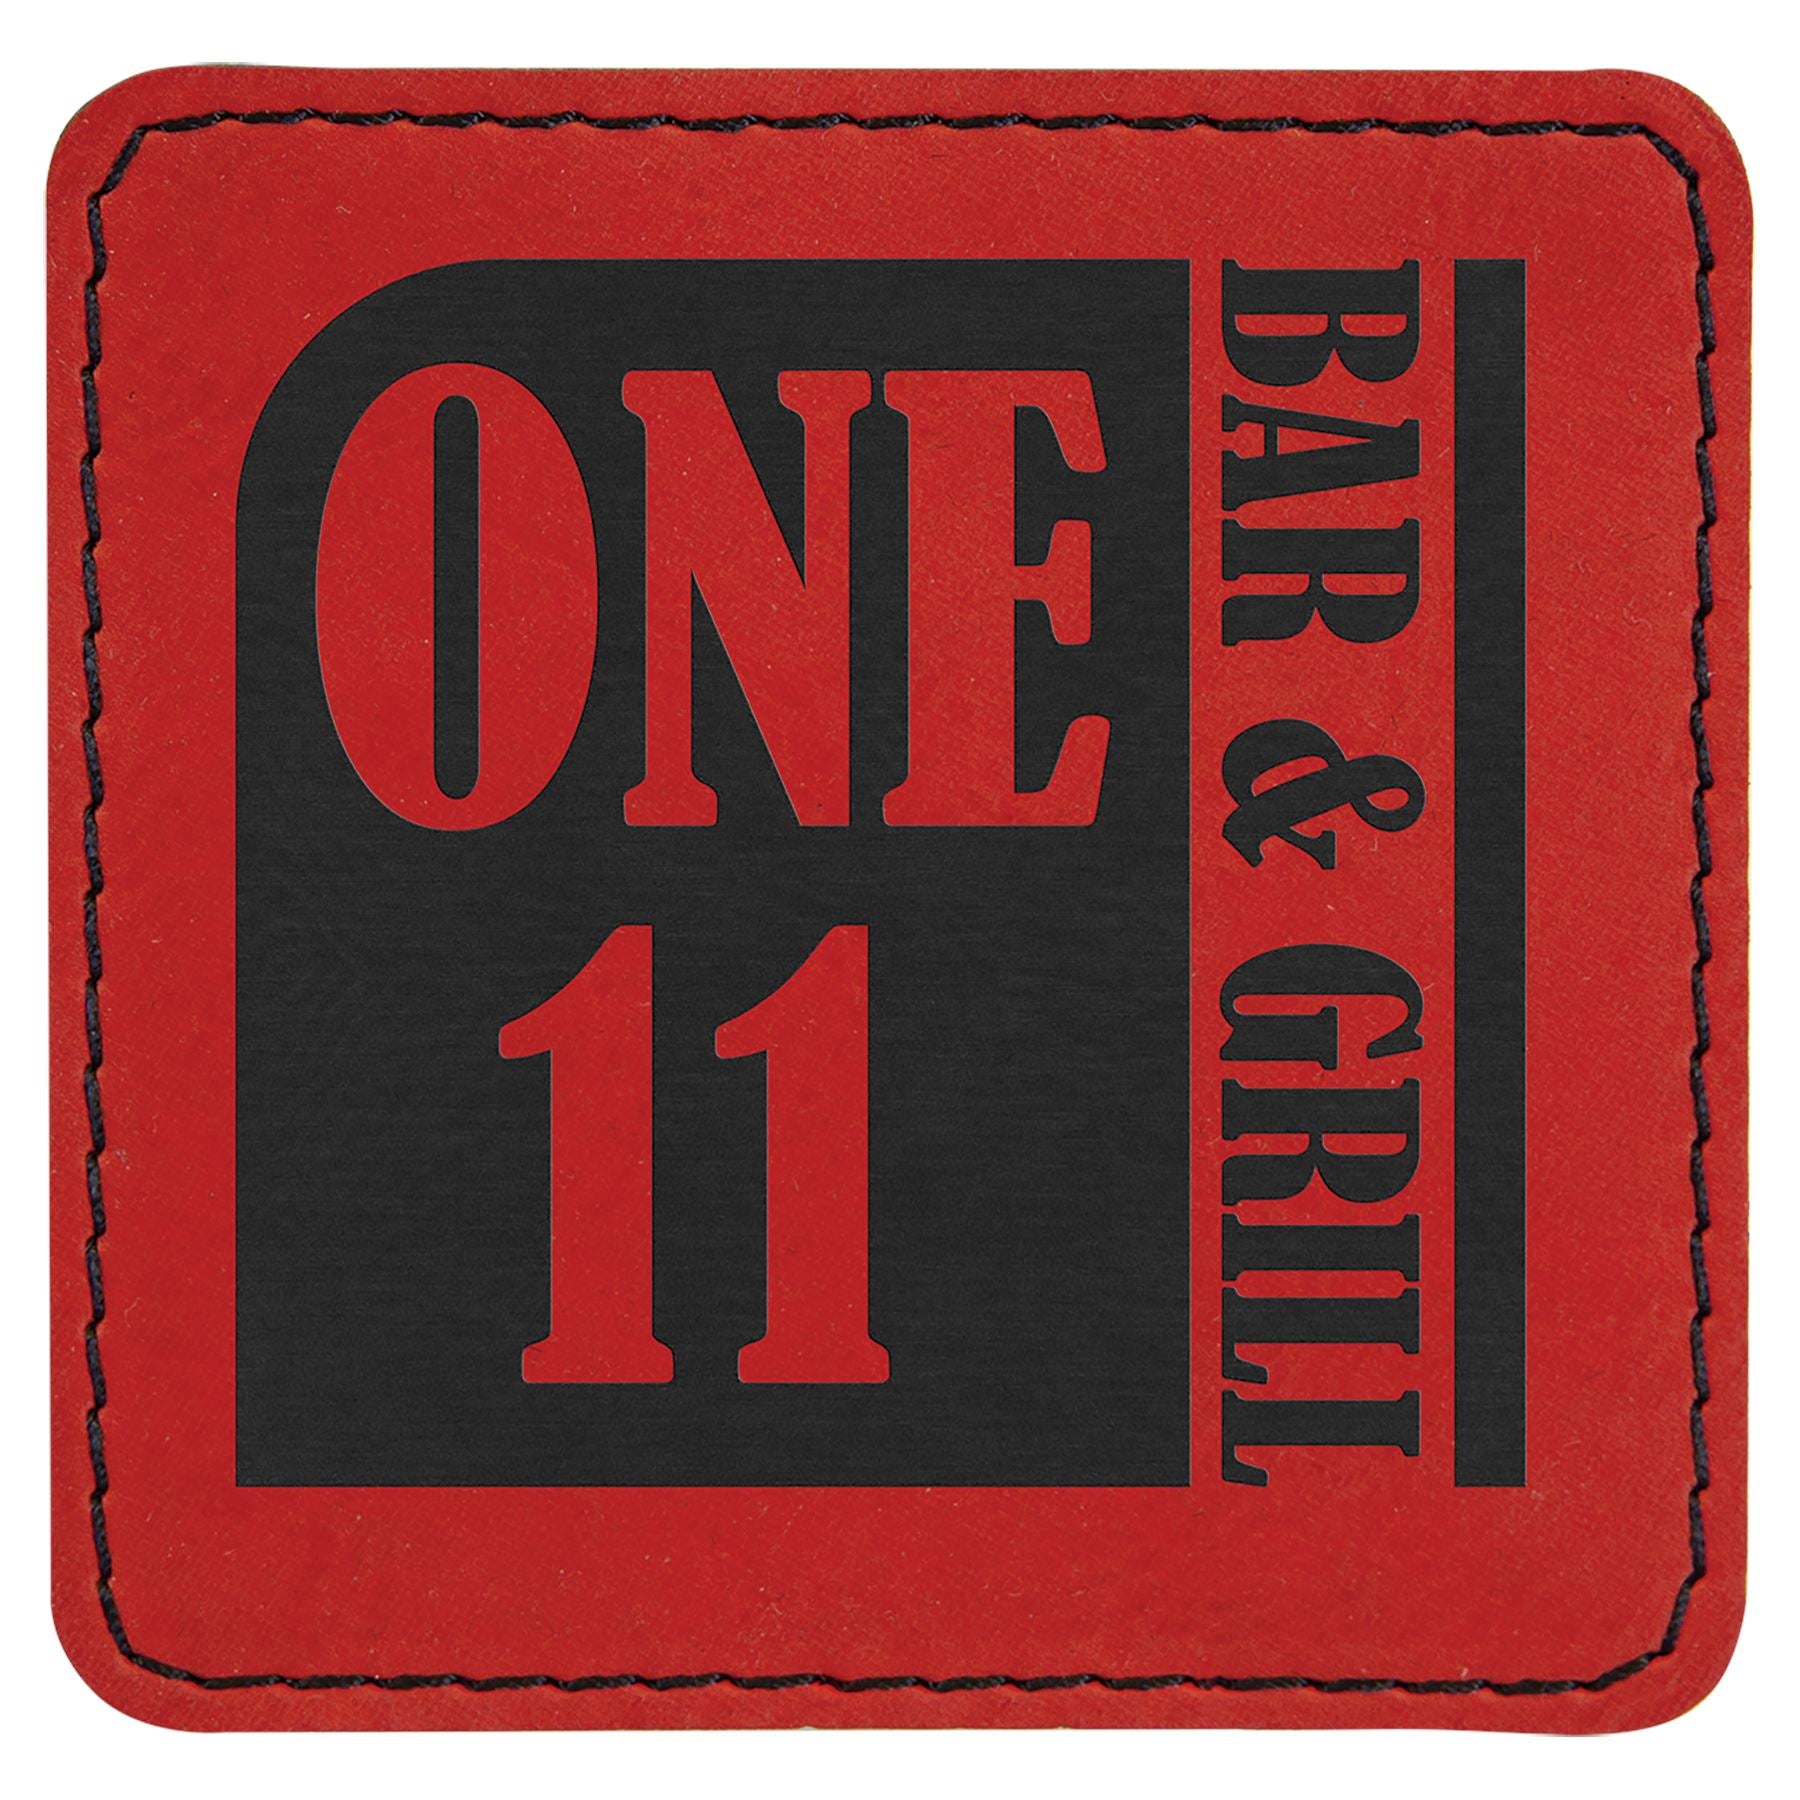 Custom Engraving Studio, LLC: 3 x 3 Square Leatherette Patch with Adhesive